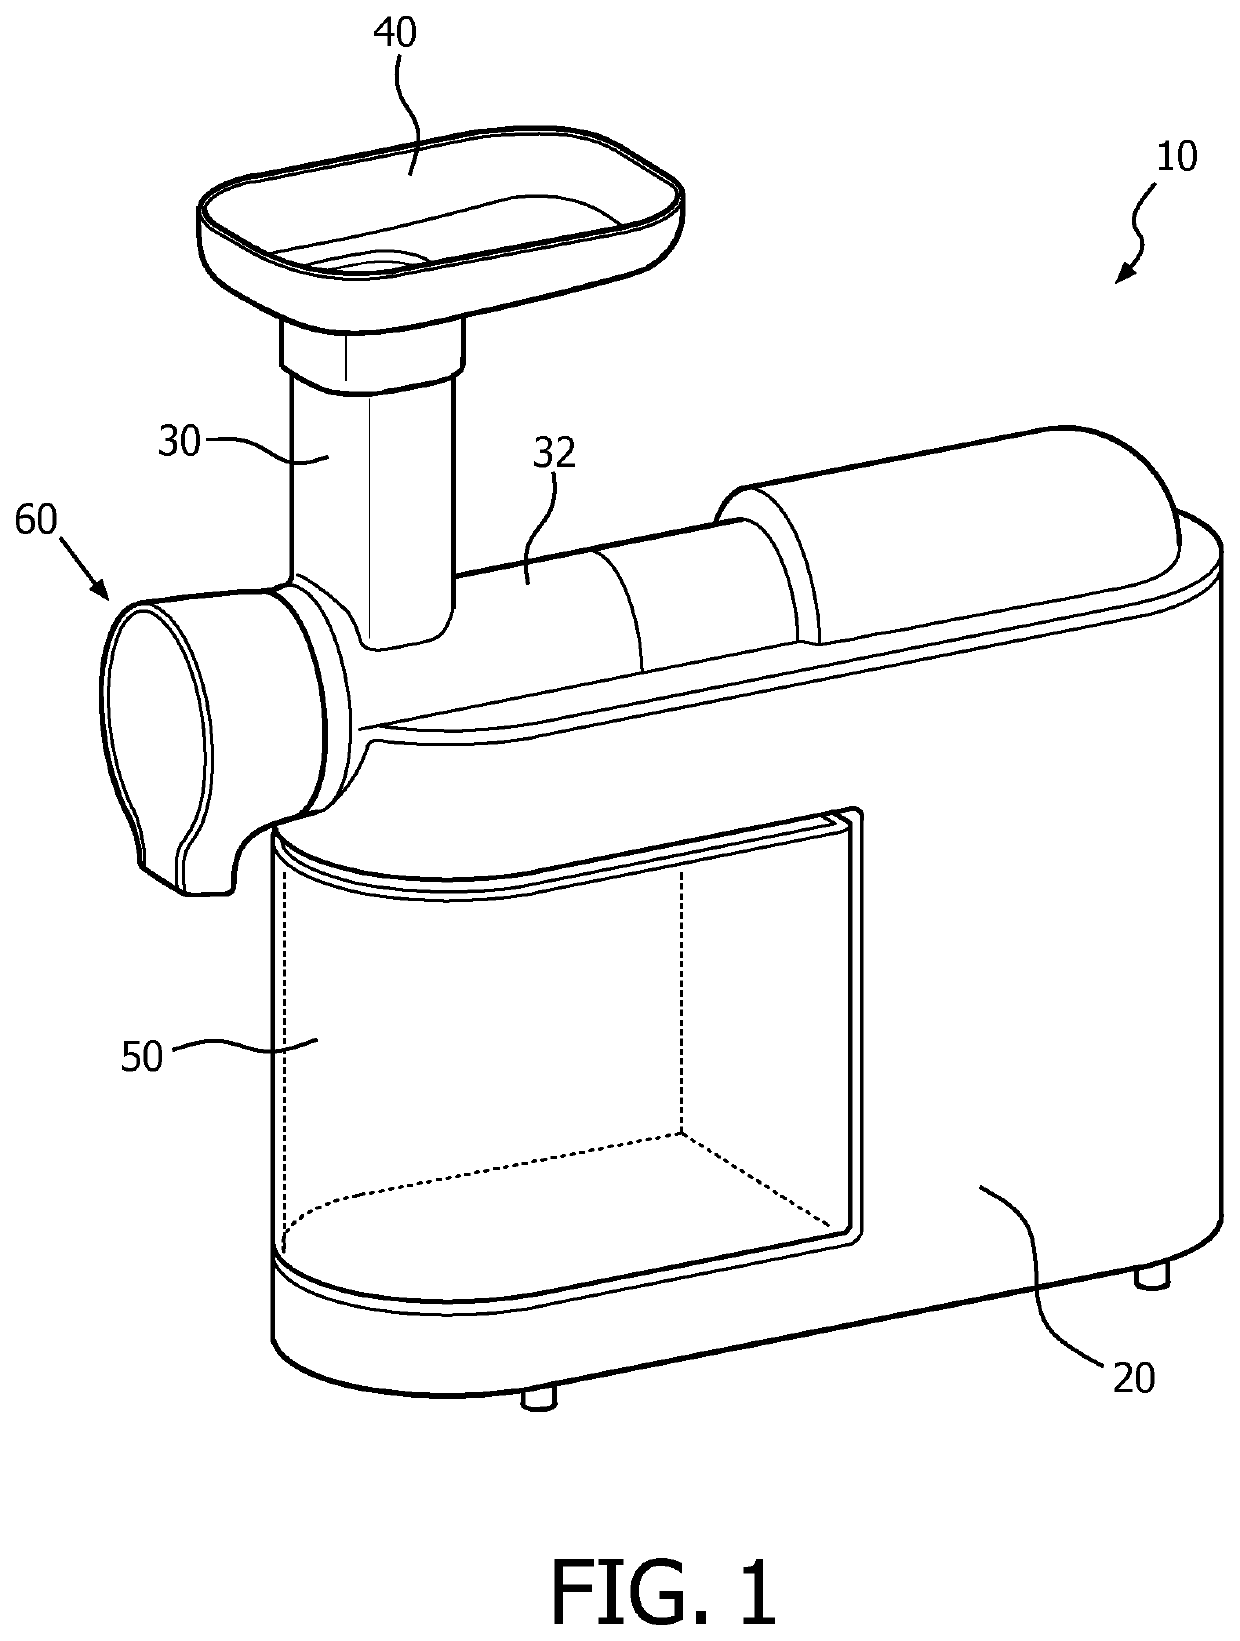 Drip-stop attachment for a food processing device